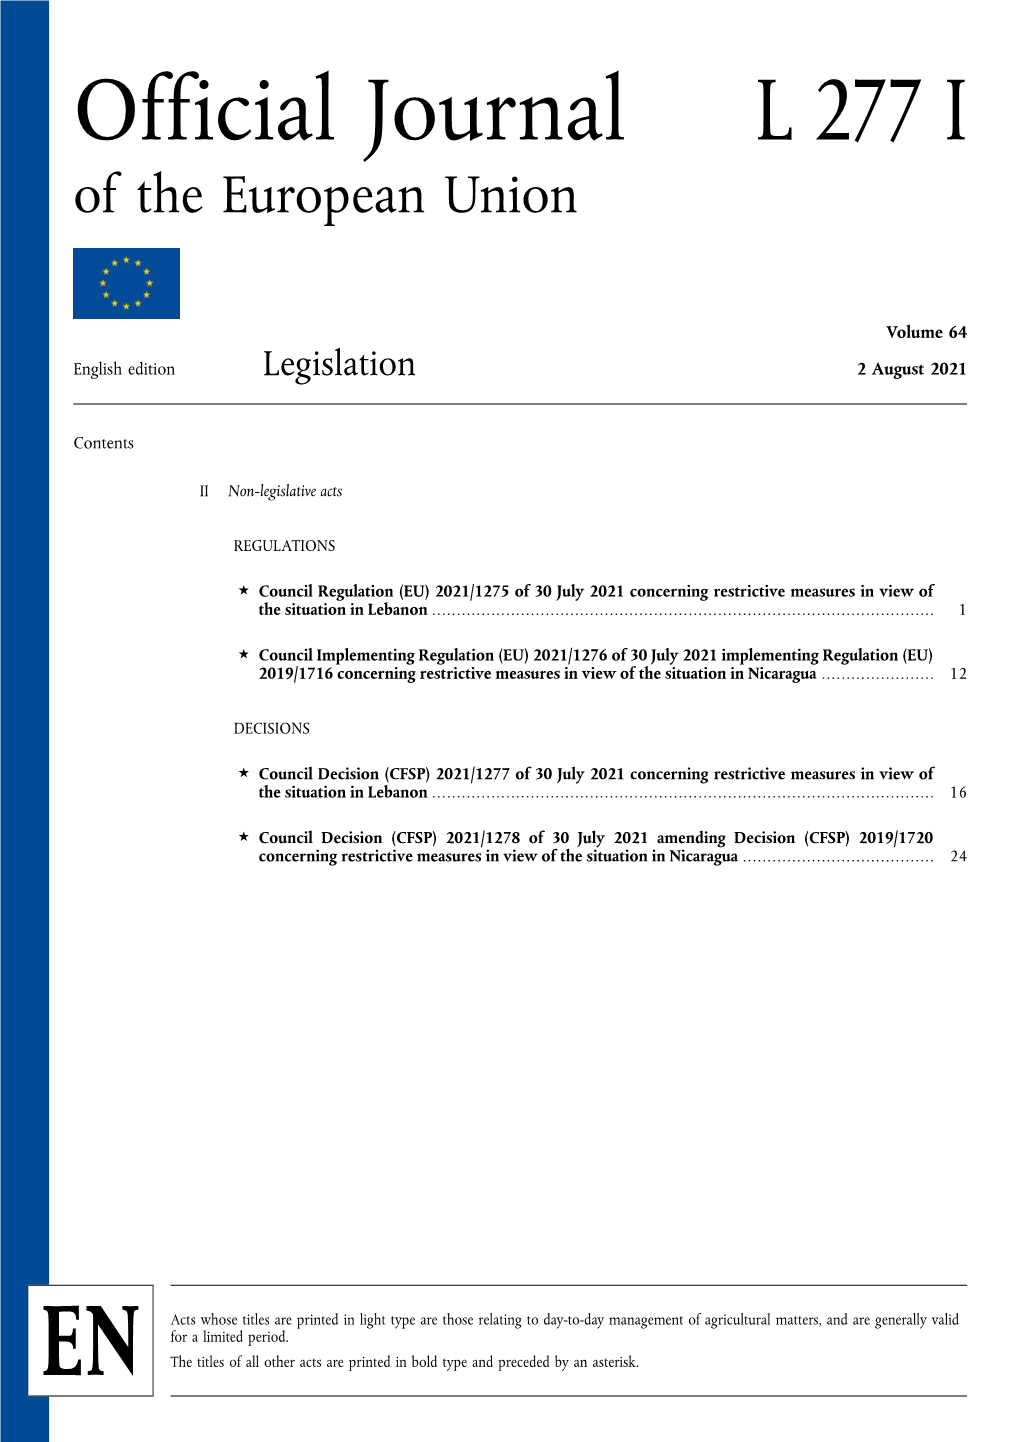 Official Journal L 277 I of the European Union